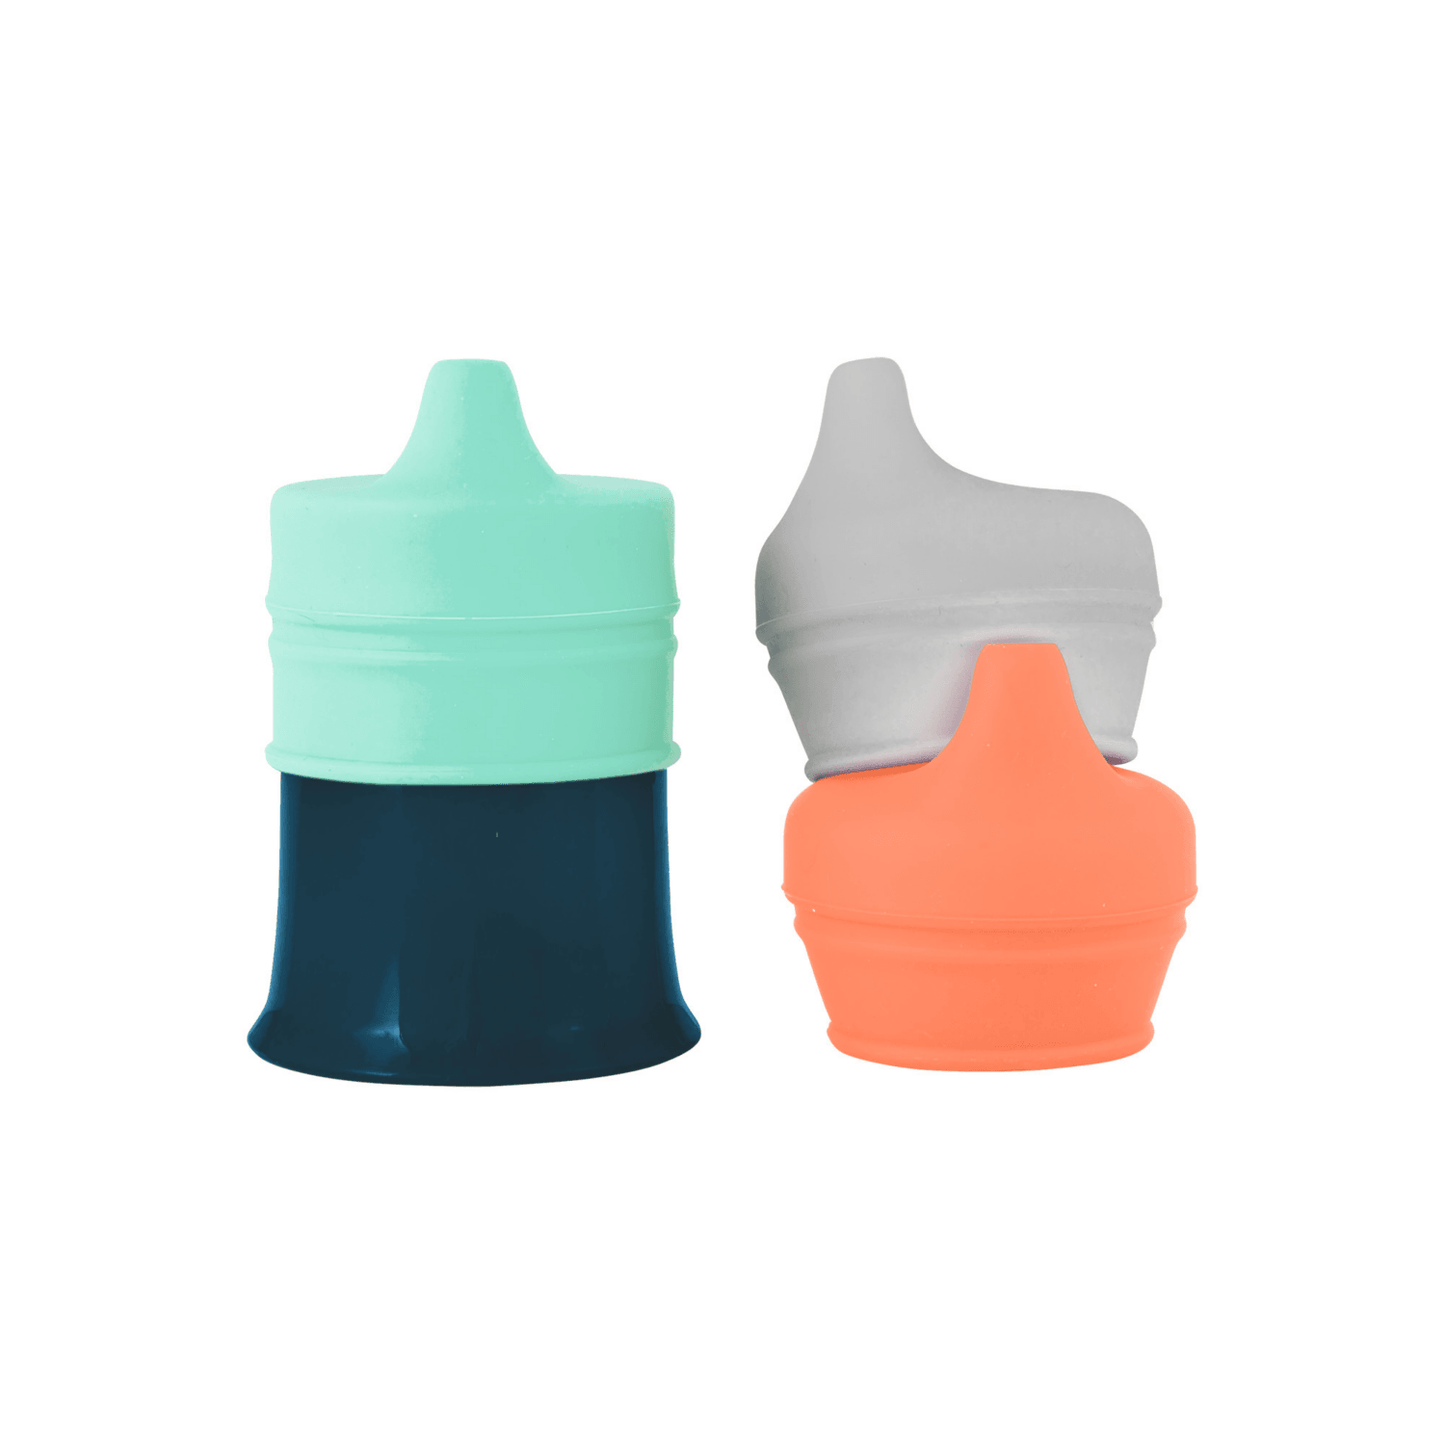 Boon SNUG Spout Universal Silicone Sippy Lids and Cup - Mint Multi